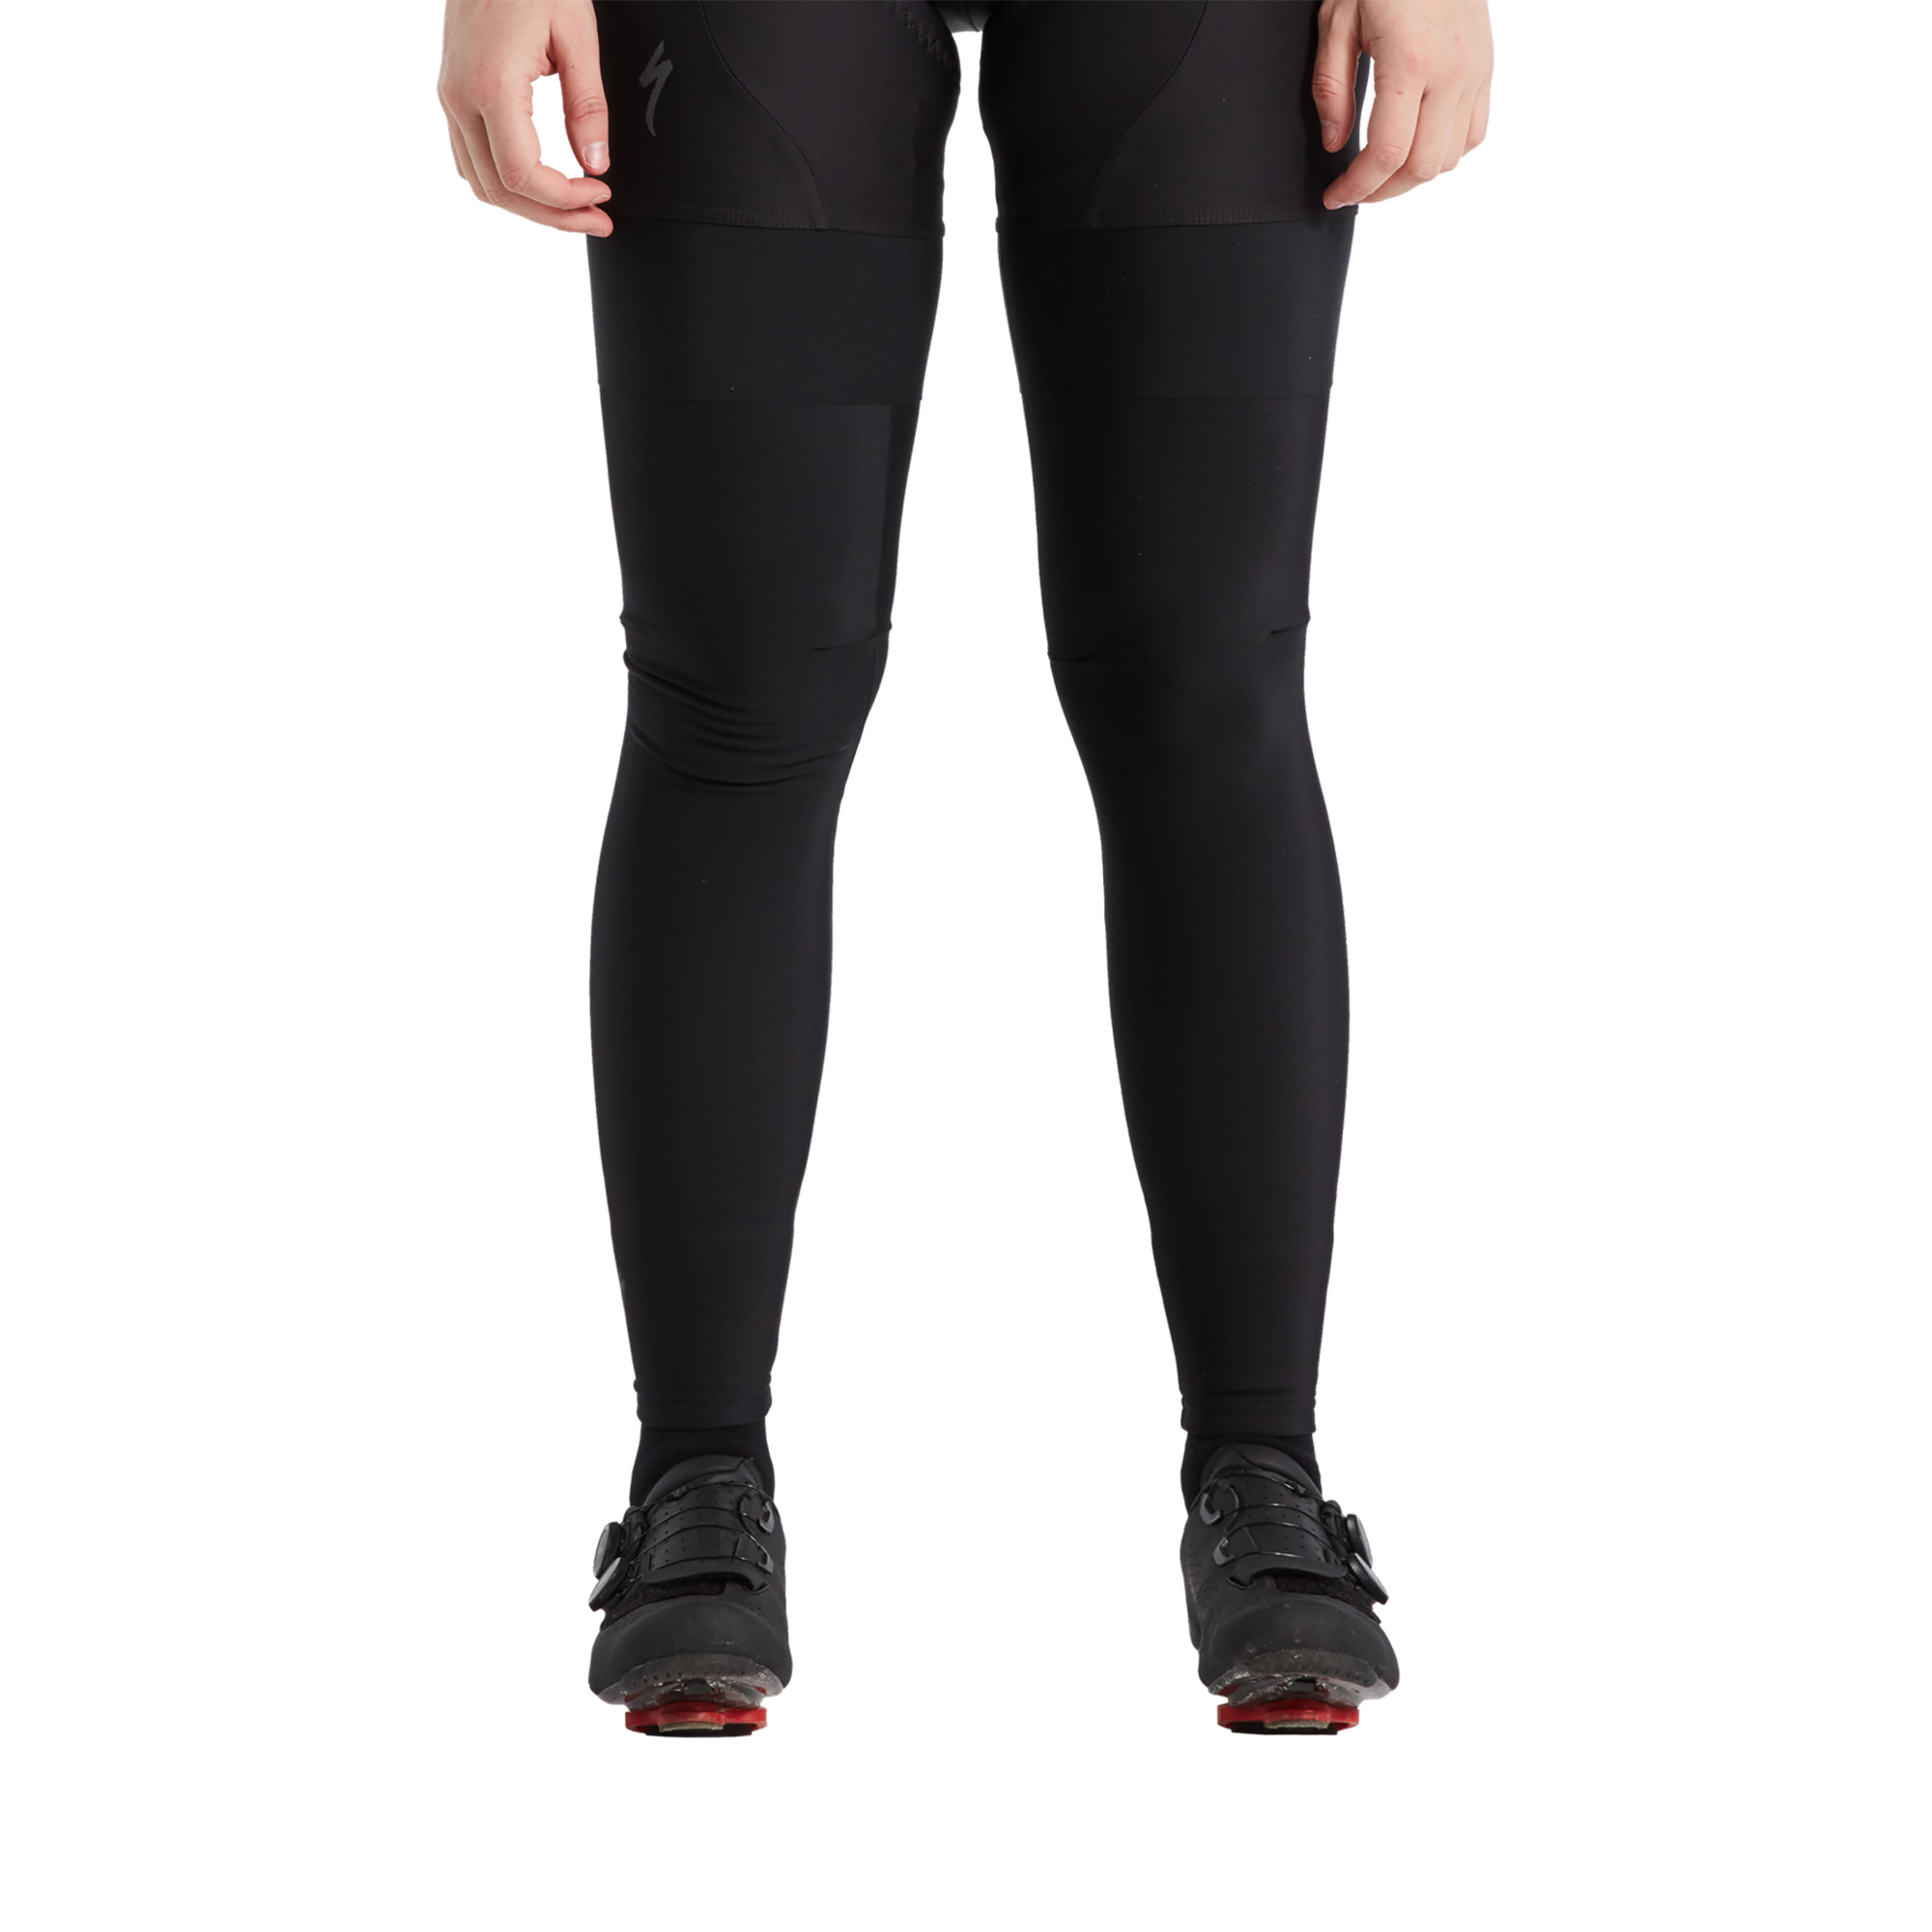 Specialized Women's RBX Expert Thermal Jersey Long Sleeve - Brantford  Cyclepath